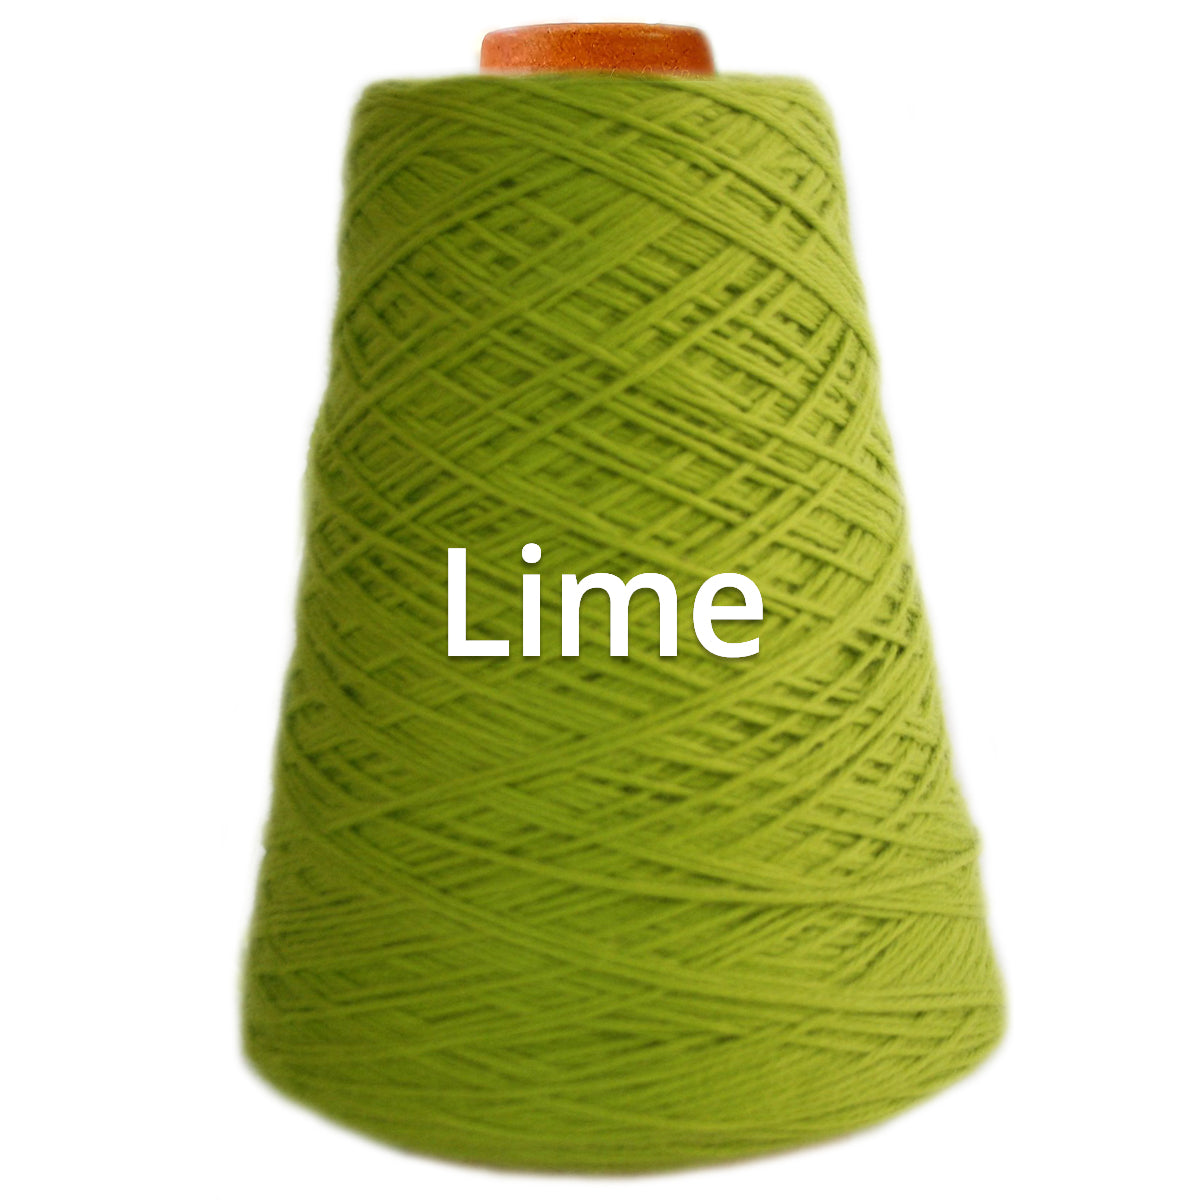 Lime - Nundle Collection 4 ply Chaffey Yarn 400g Conex